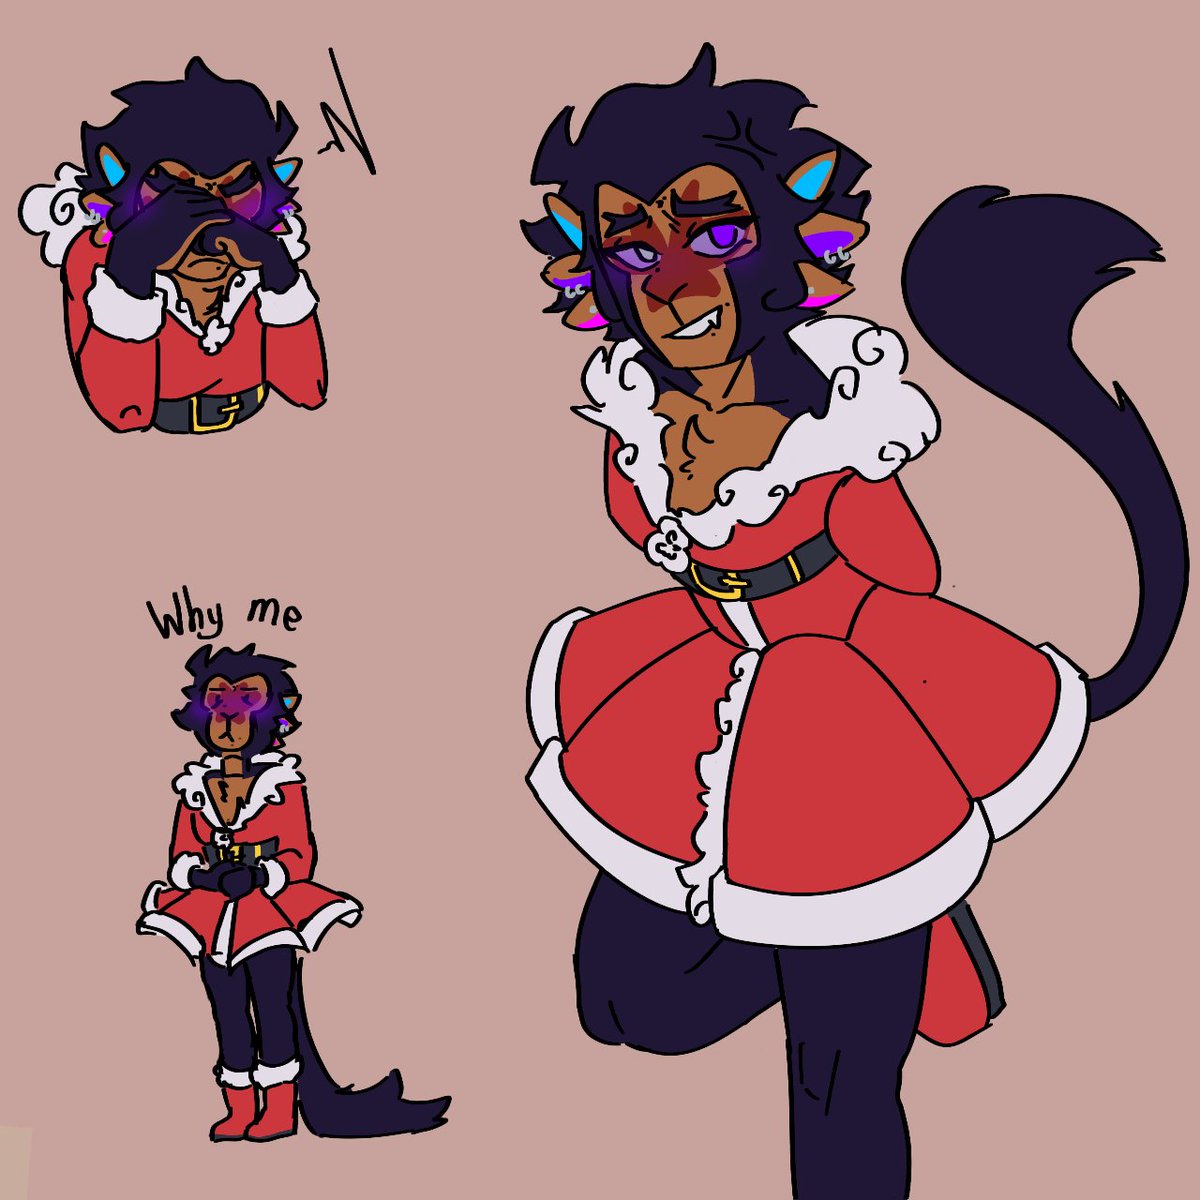 This was supposed to be a silly dress up theme from the grinch from live action film, but Macaque was a perfect opportunity to dress him up as Martha May Whovier(I love Martha May Whovier♡♡)
Anyway, Merry (early) Christmas
#shadowpeach #lmksunwukong #lmksixearedmacaque